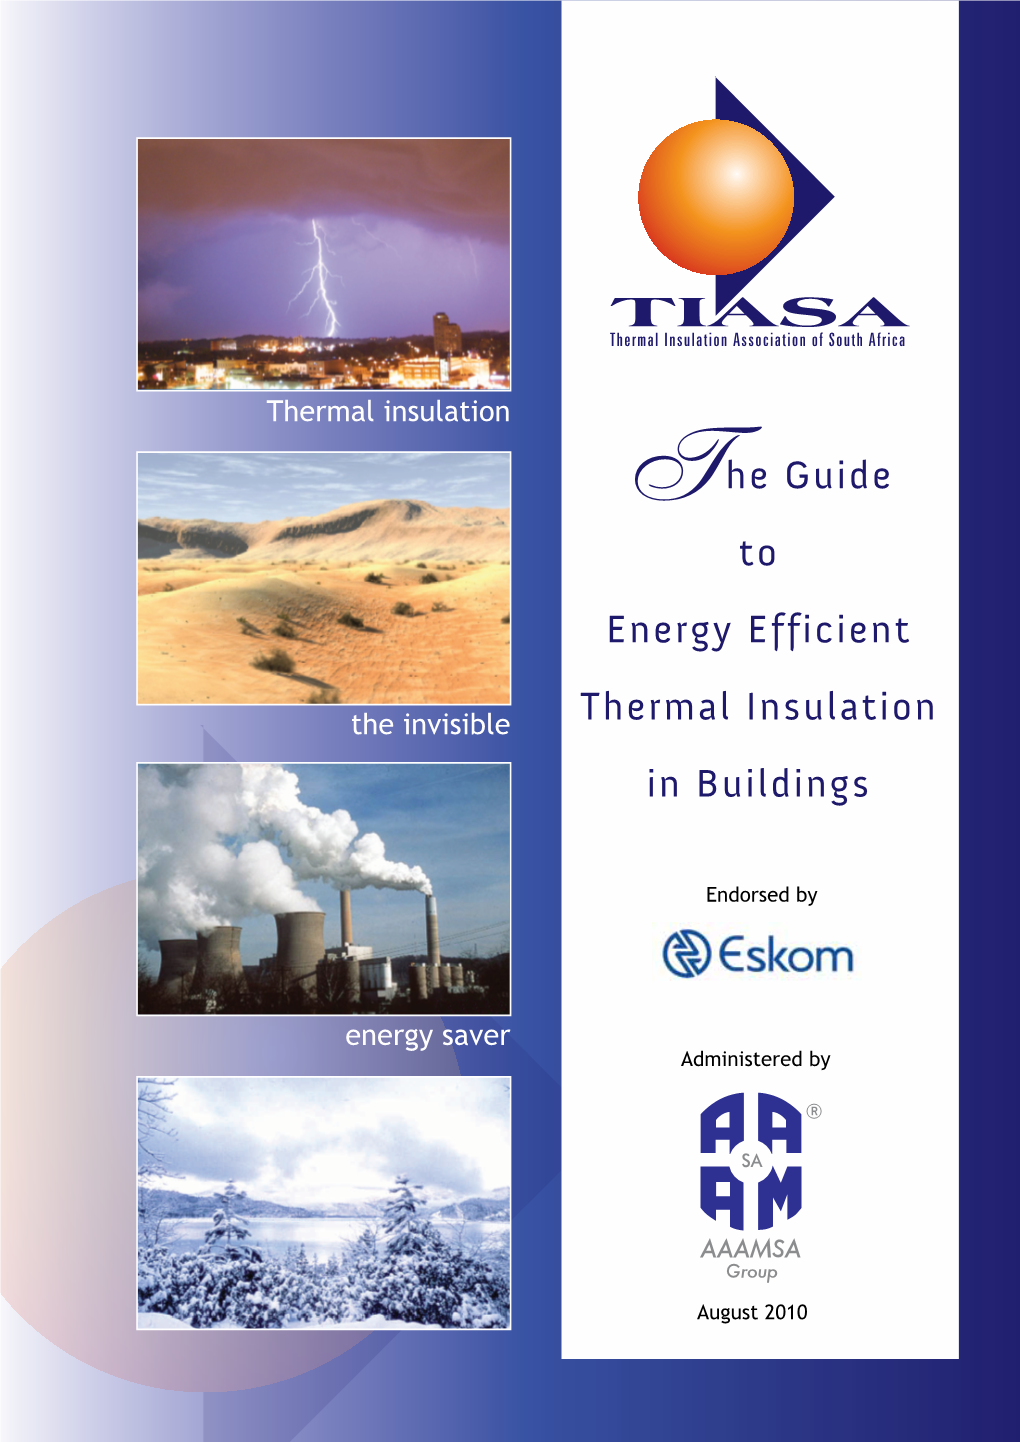 The Guide to Energy Efficient Thermal Insulation in Buildings